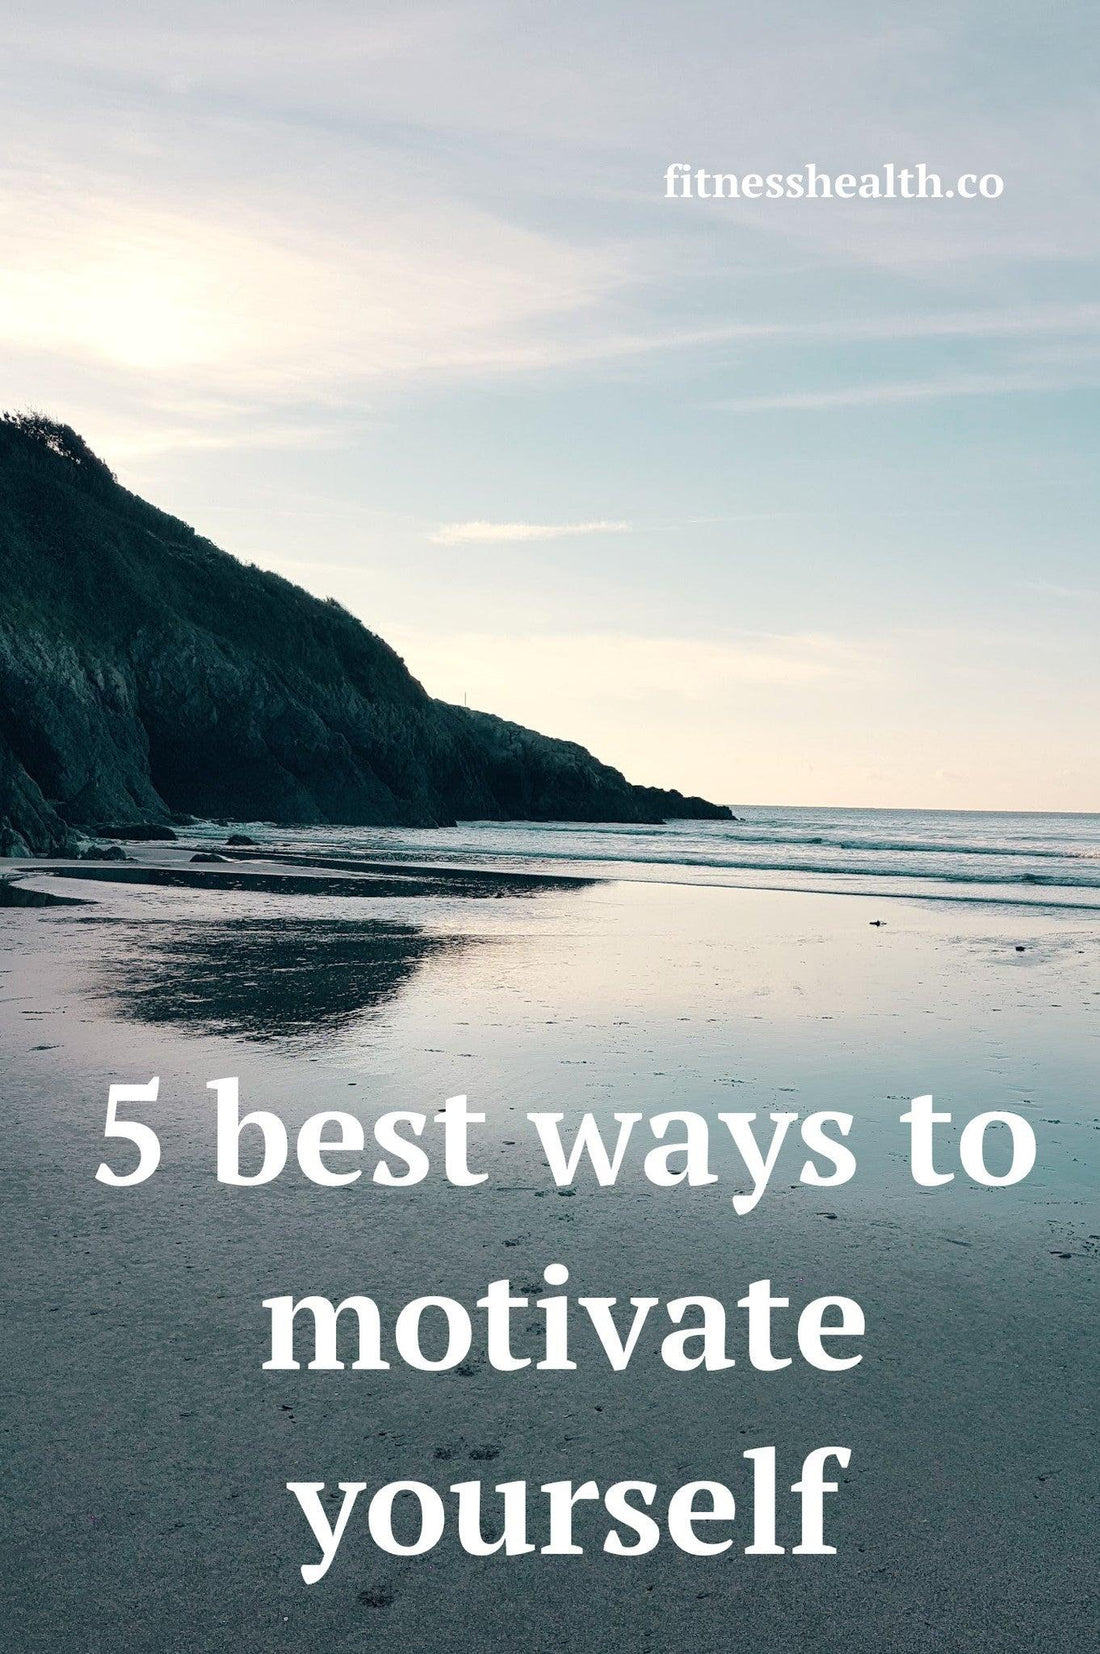 5 best ways to motivate yourself - Fitness Health 